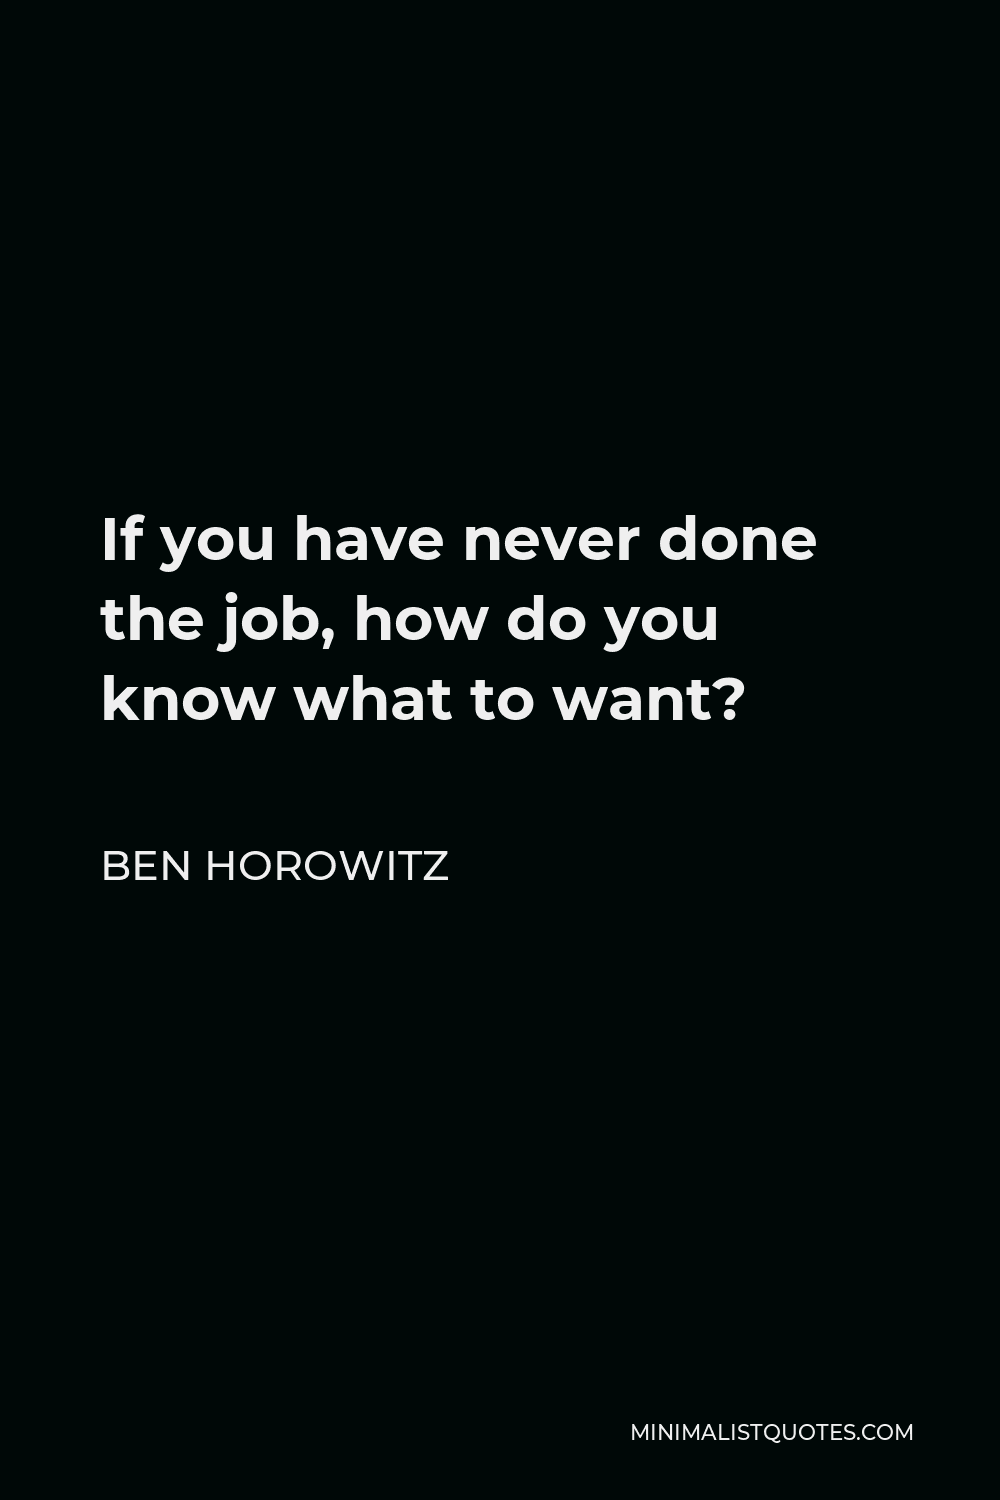 ben-horowitz-quote-if-you-have-never-done-the-job-how-do-you-know-what-to-want